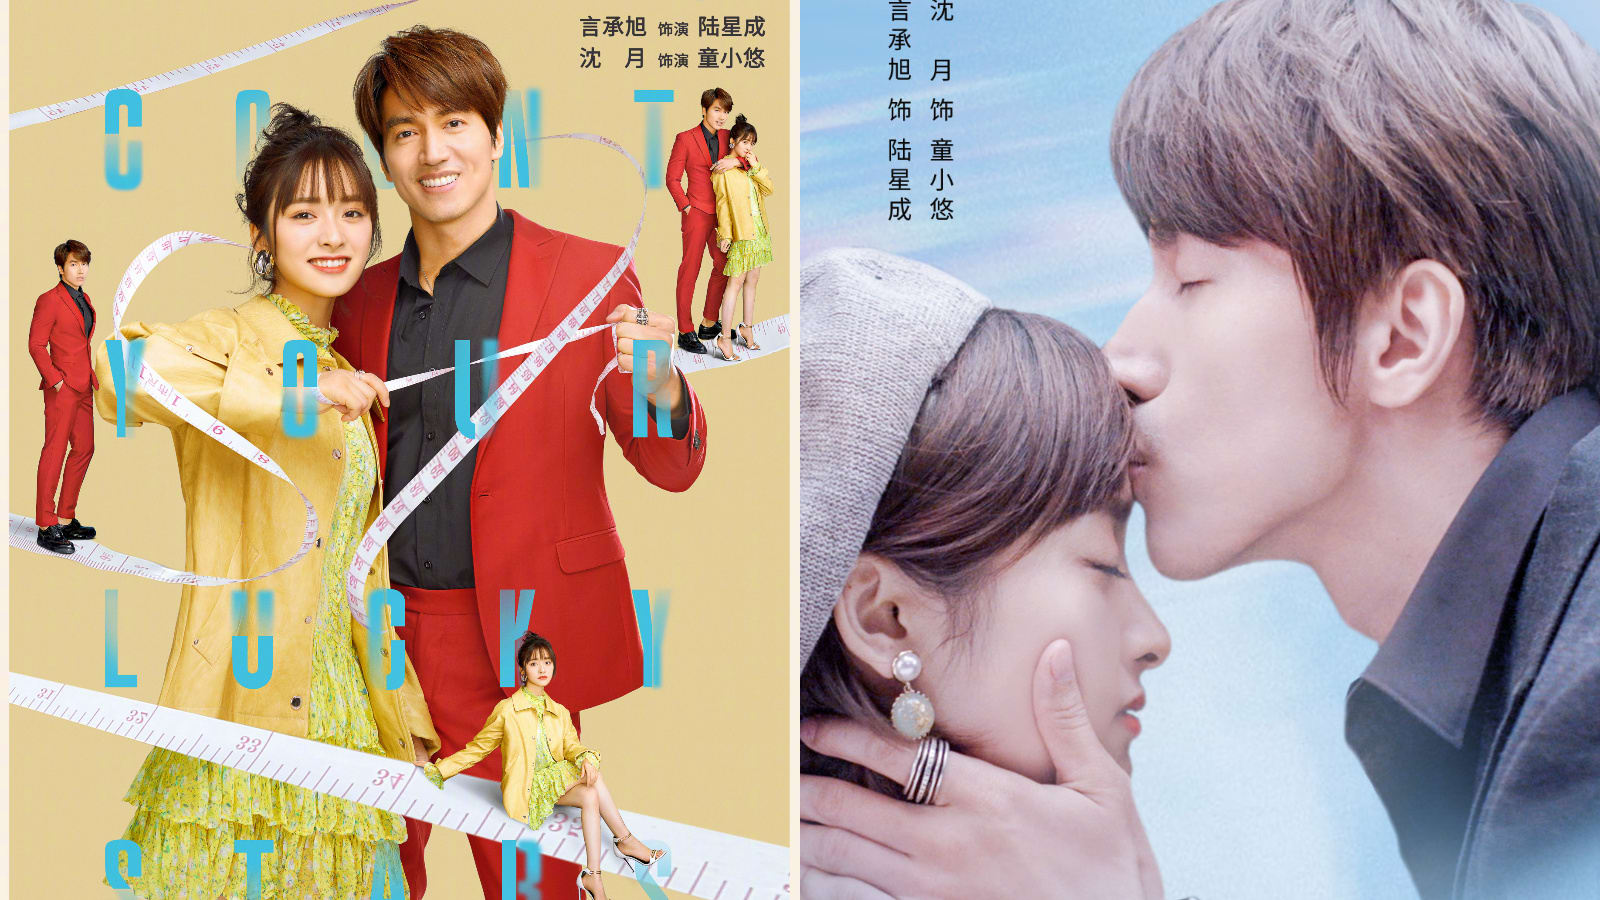 Jerry Yan, 43, Called An "Uncle" By Netizens For Romancing A 23-Year-Old Chinese Actress In New Drama